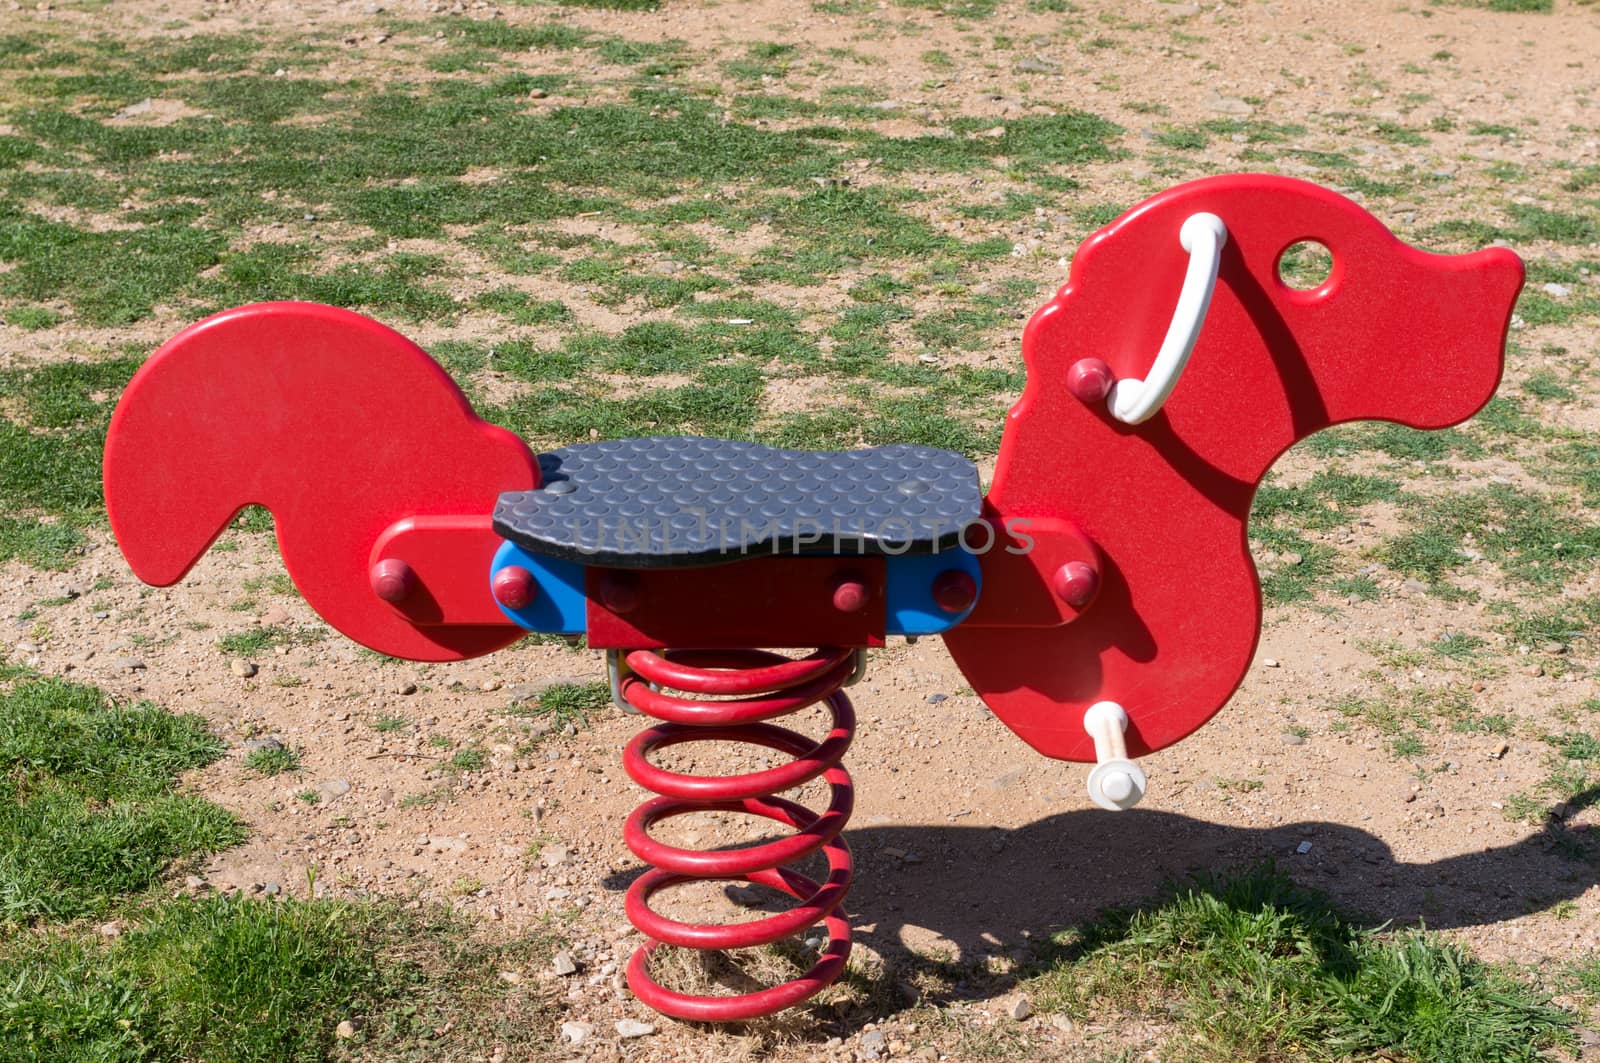 Detail of a playground: rocking horse for children.